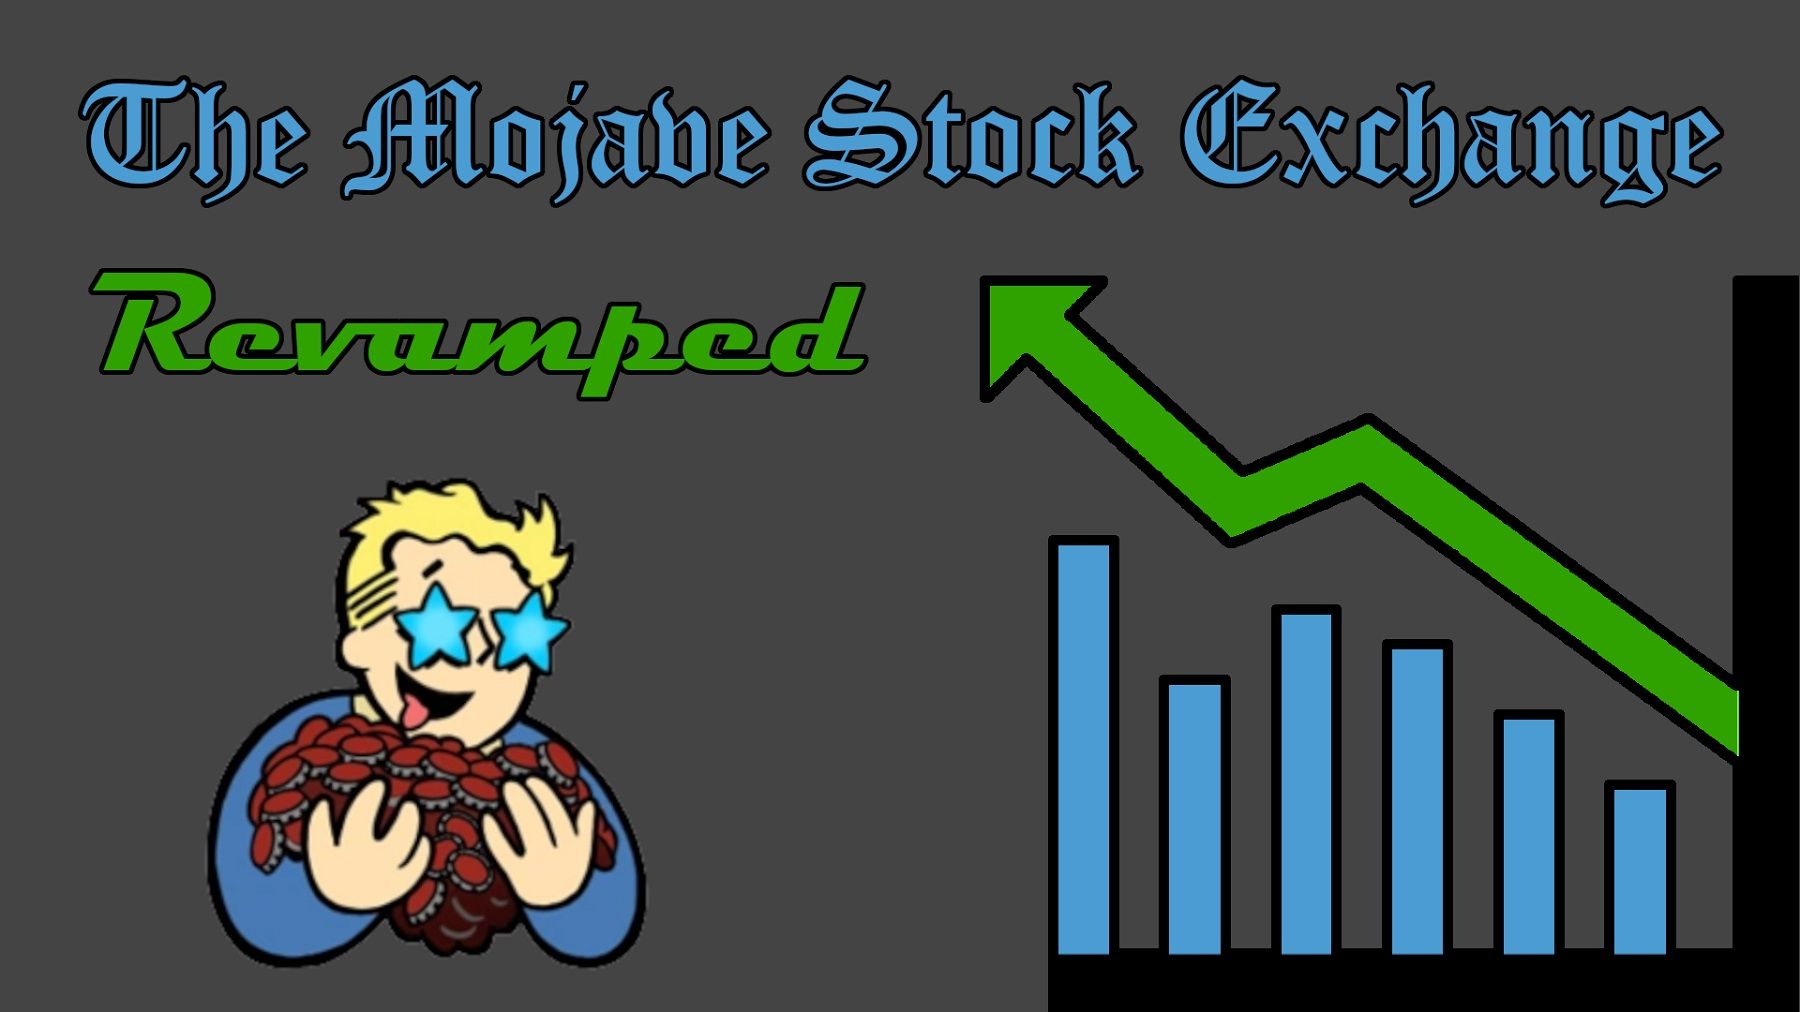 Image from a Fallout: New Vegas mod showing the Fallout Boy holding a load of caps next to a stock market chart.